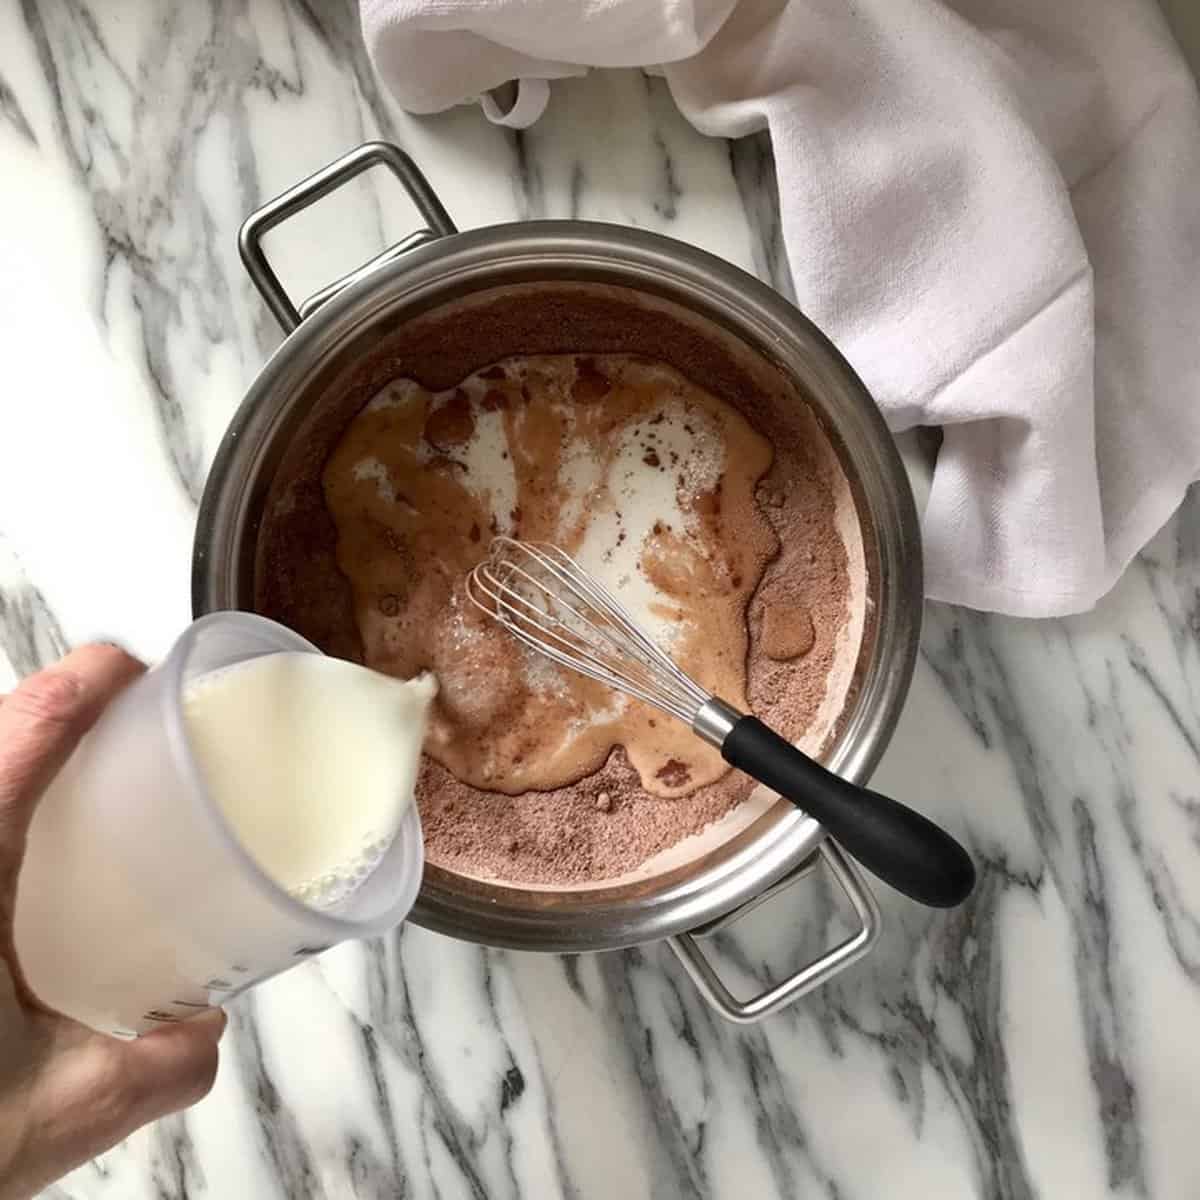 Milk is being poured in a large saucepan to be combined with the dry ingredients to make chocolate pudding.